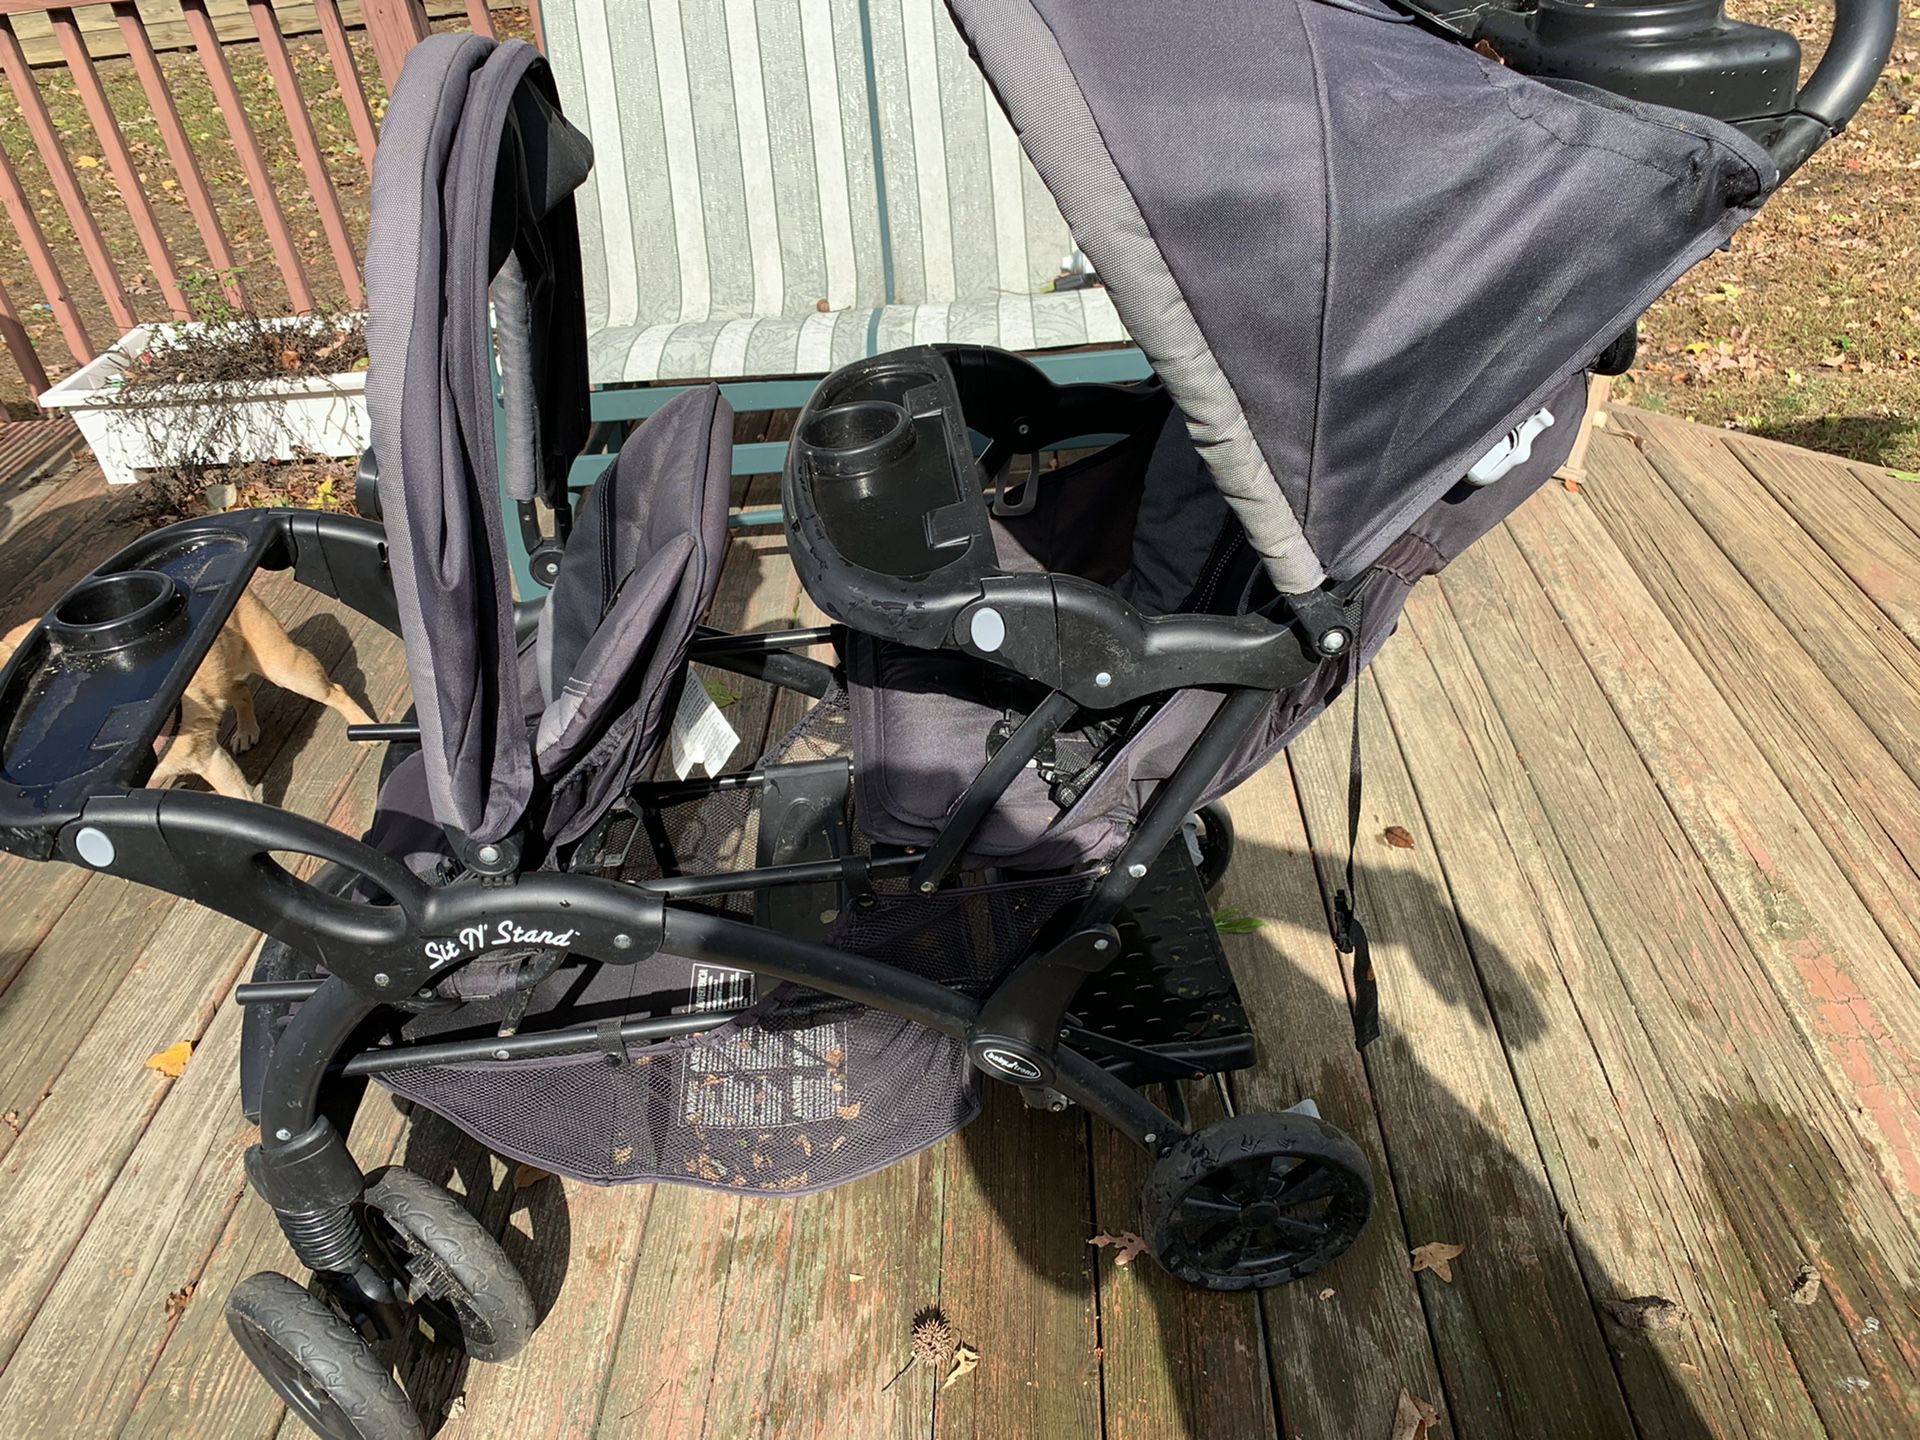 Baby trend sit and stand double stroller